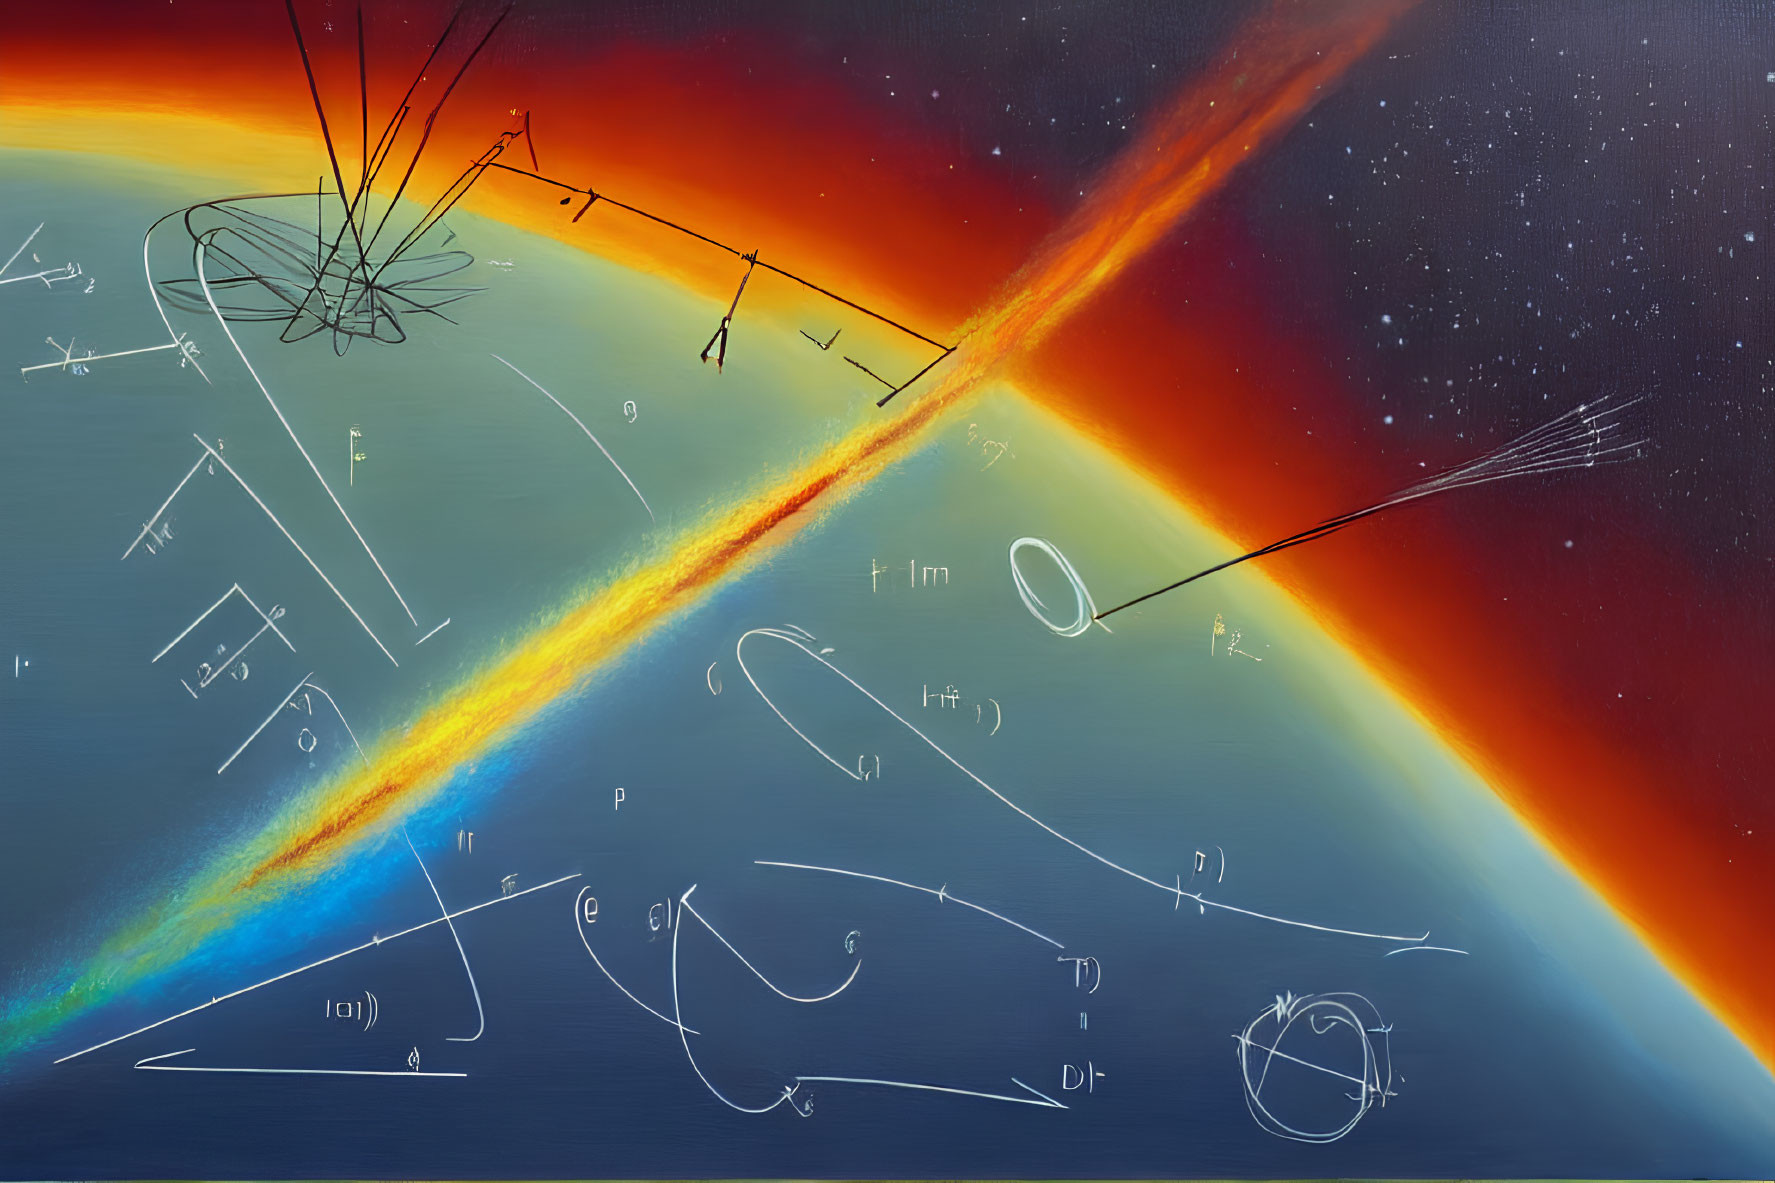 Abstract digital artwork: surreal physics and math diagrams on cosmic background